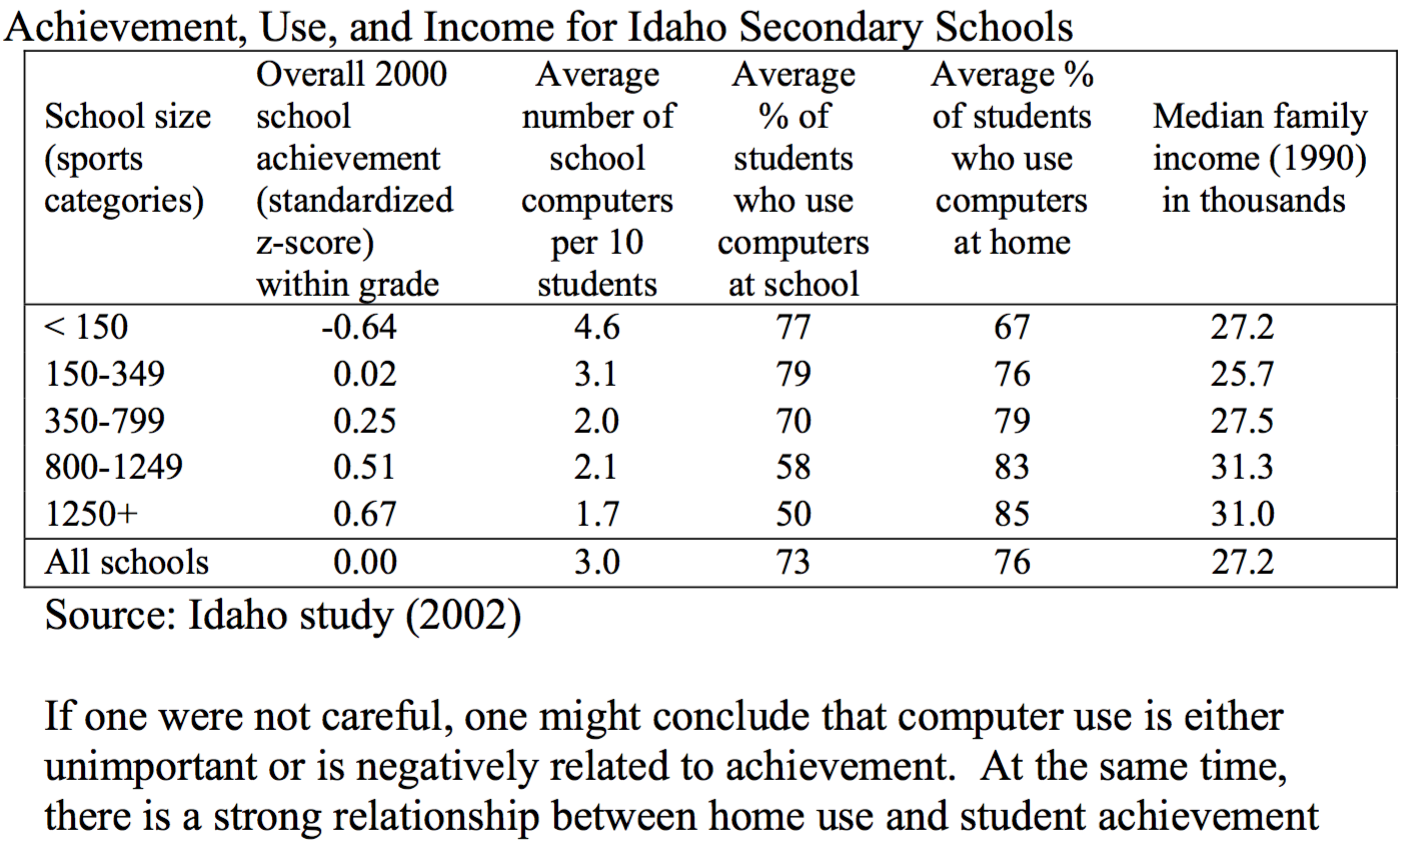 Table showing complex relationship between school and home computer use and student achievement in Idaho study.  The 